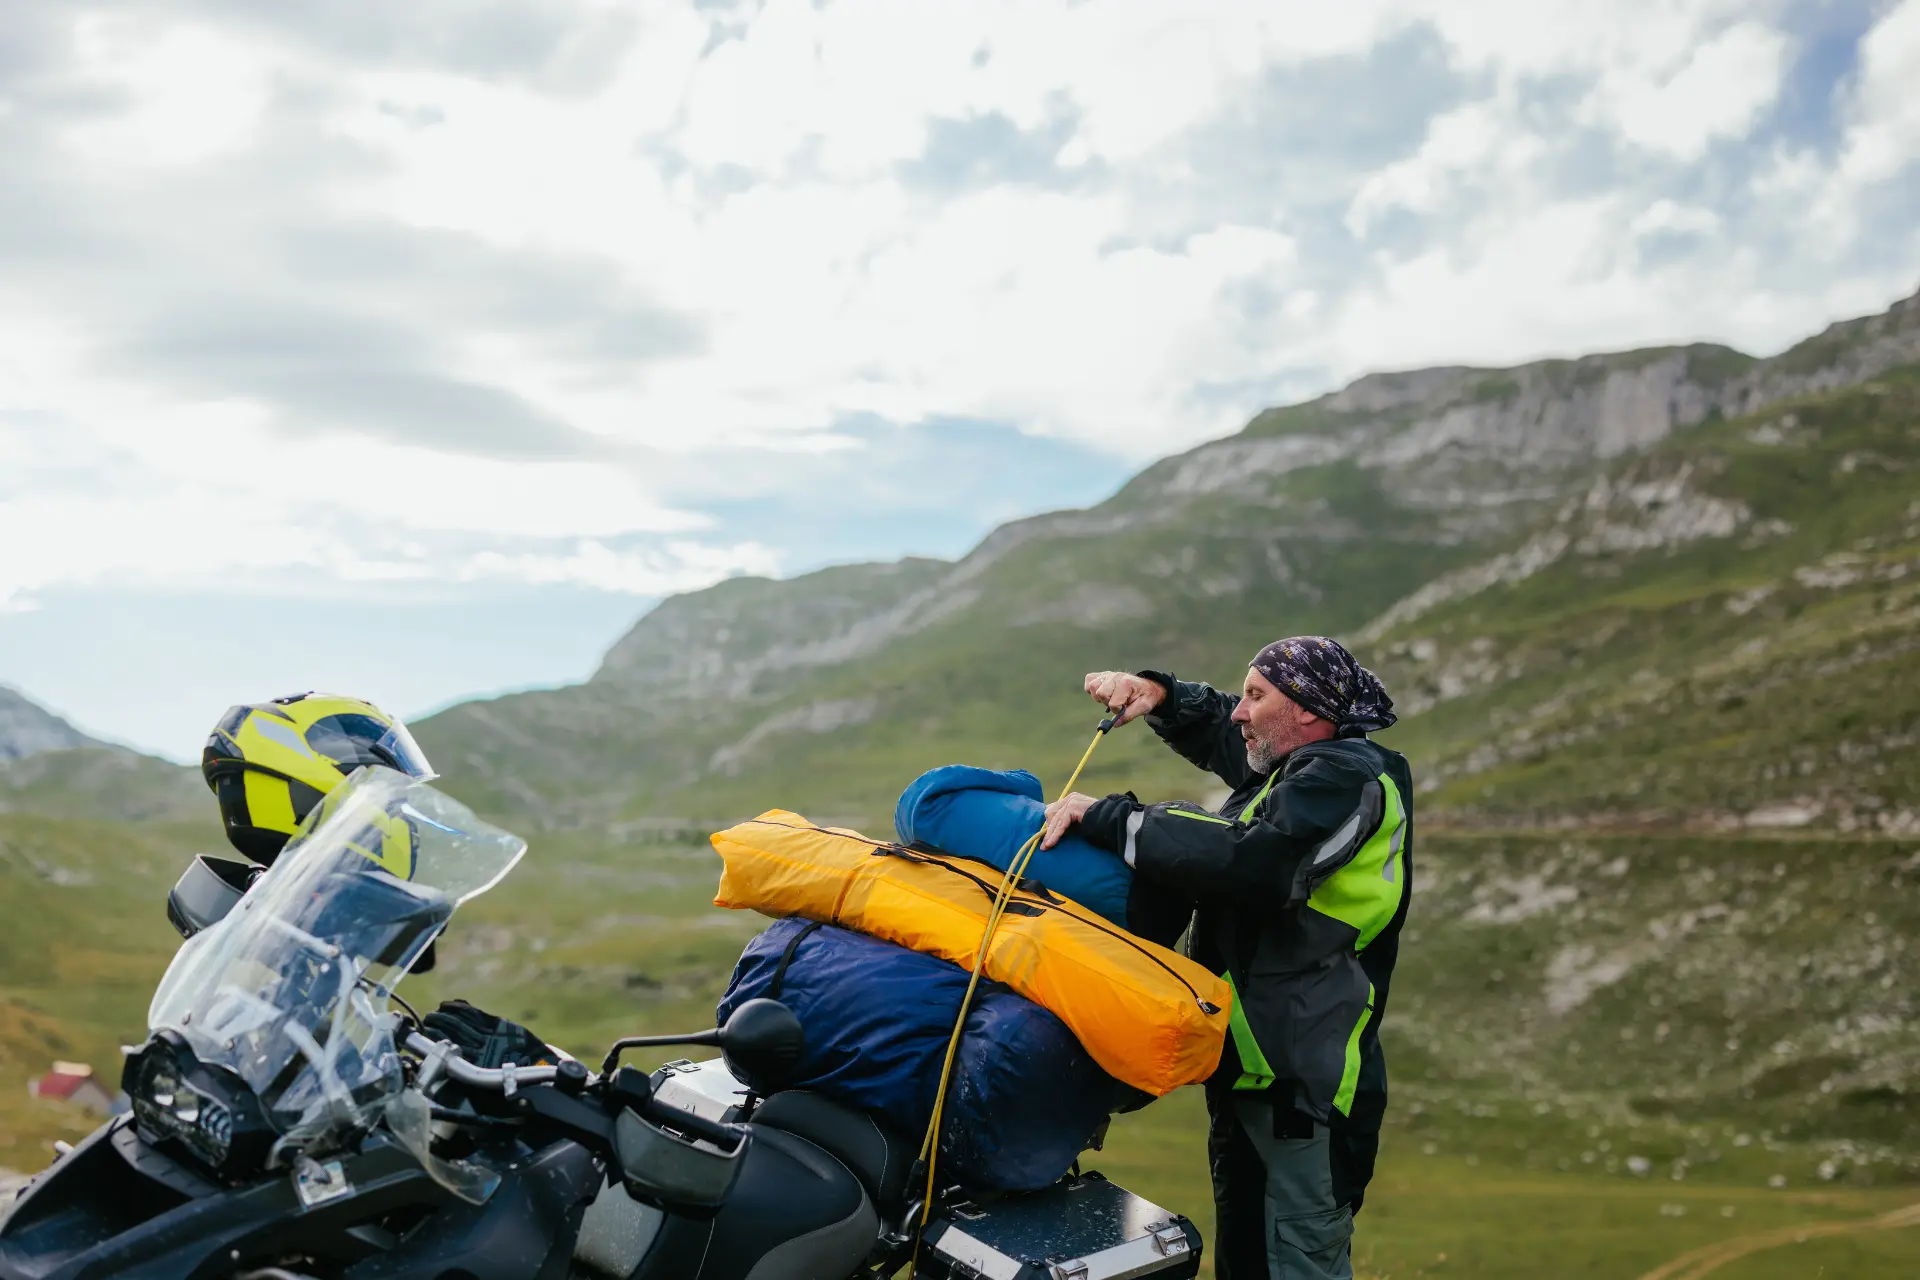 Camping Gear For Motorcycles